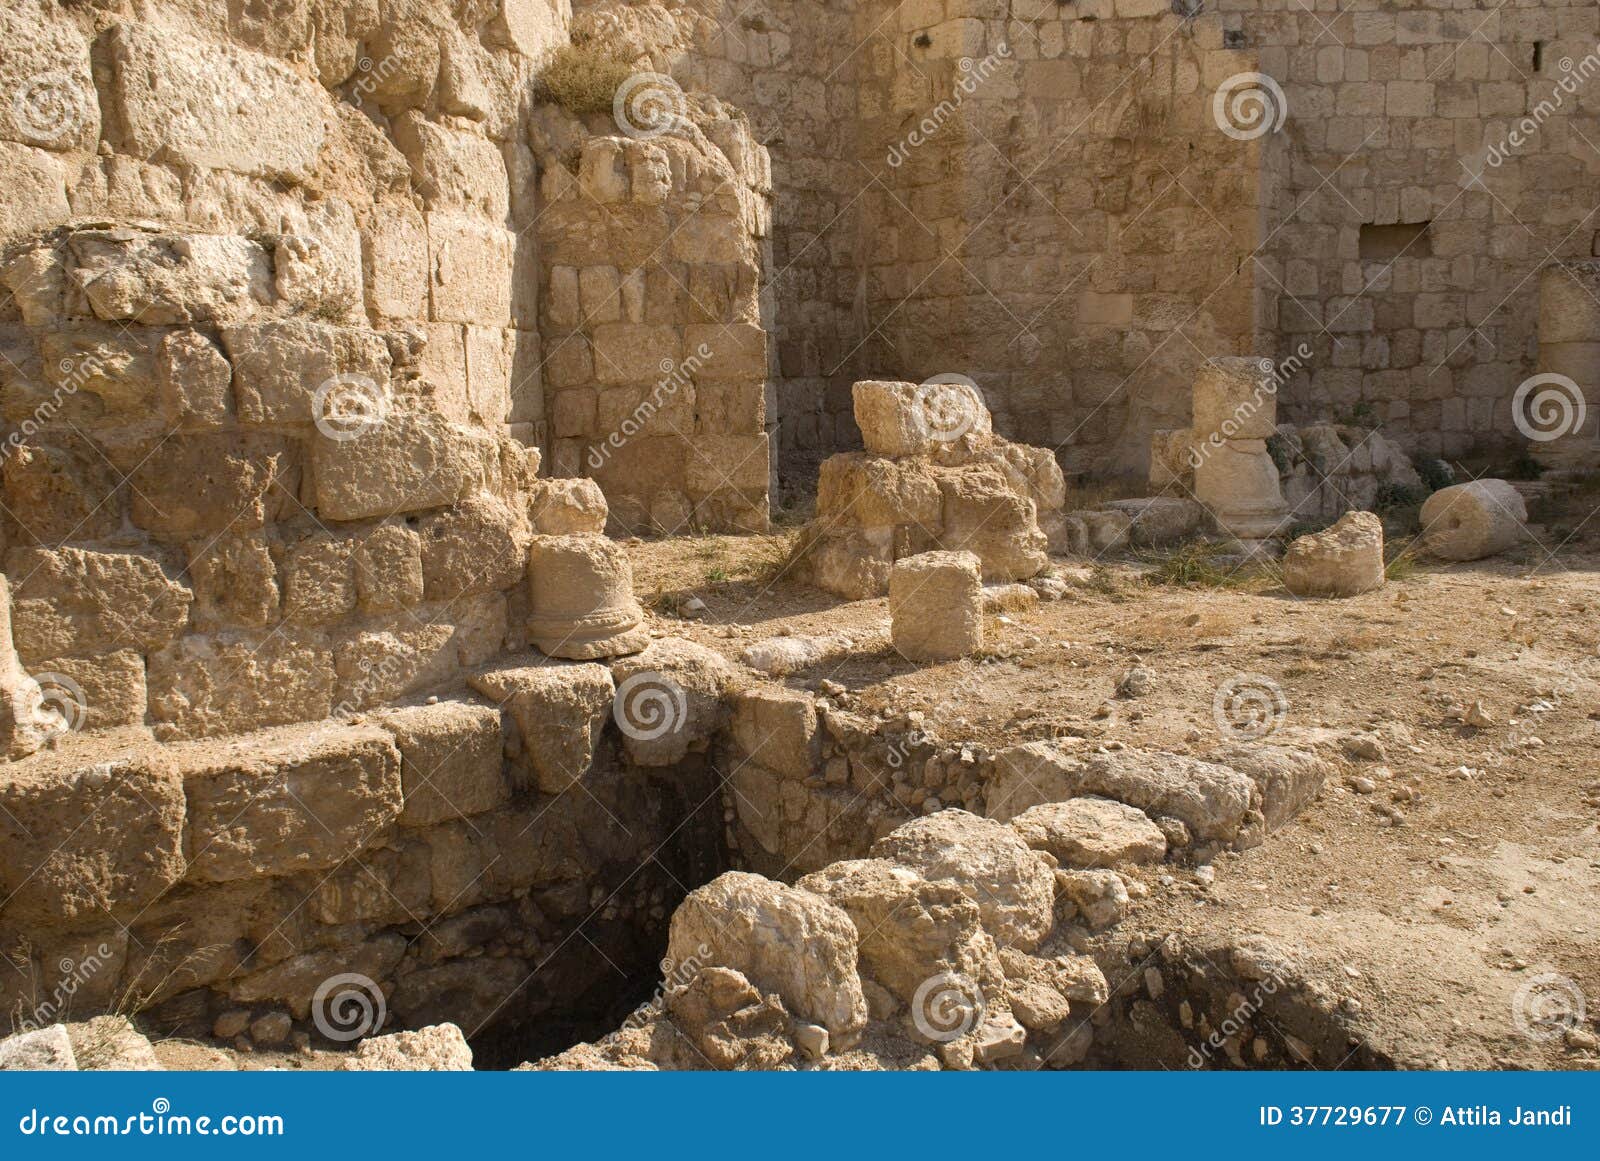 ruins of the fortress of herod, the great, herodium, palestine